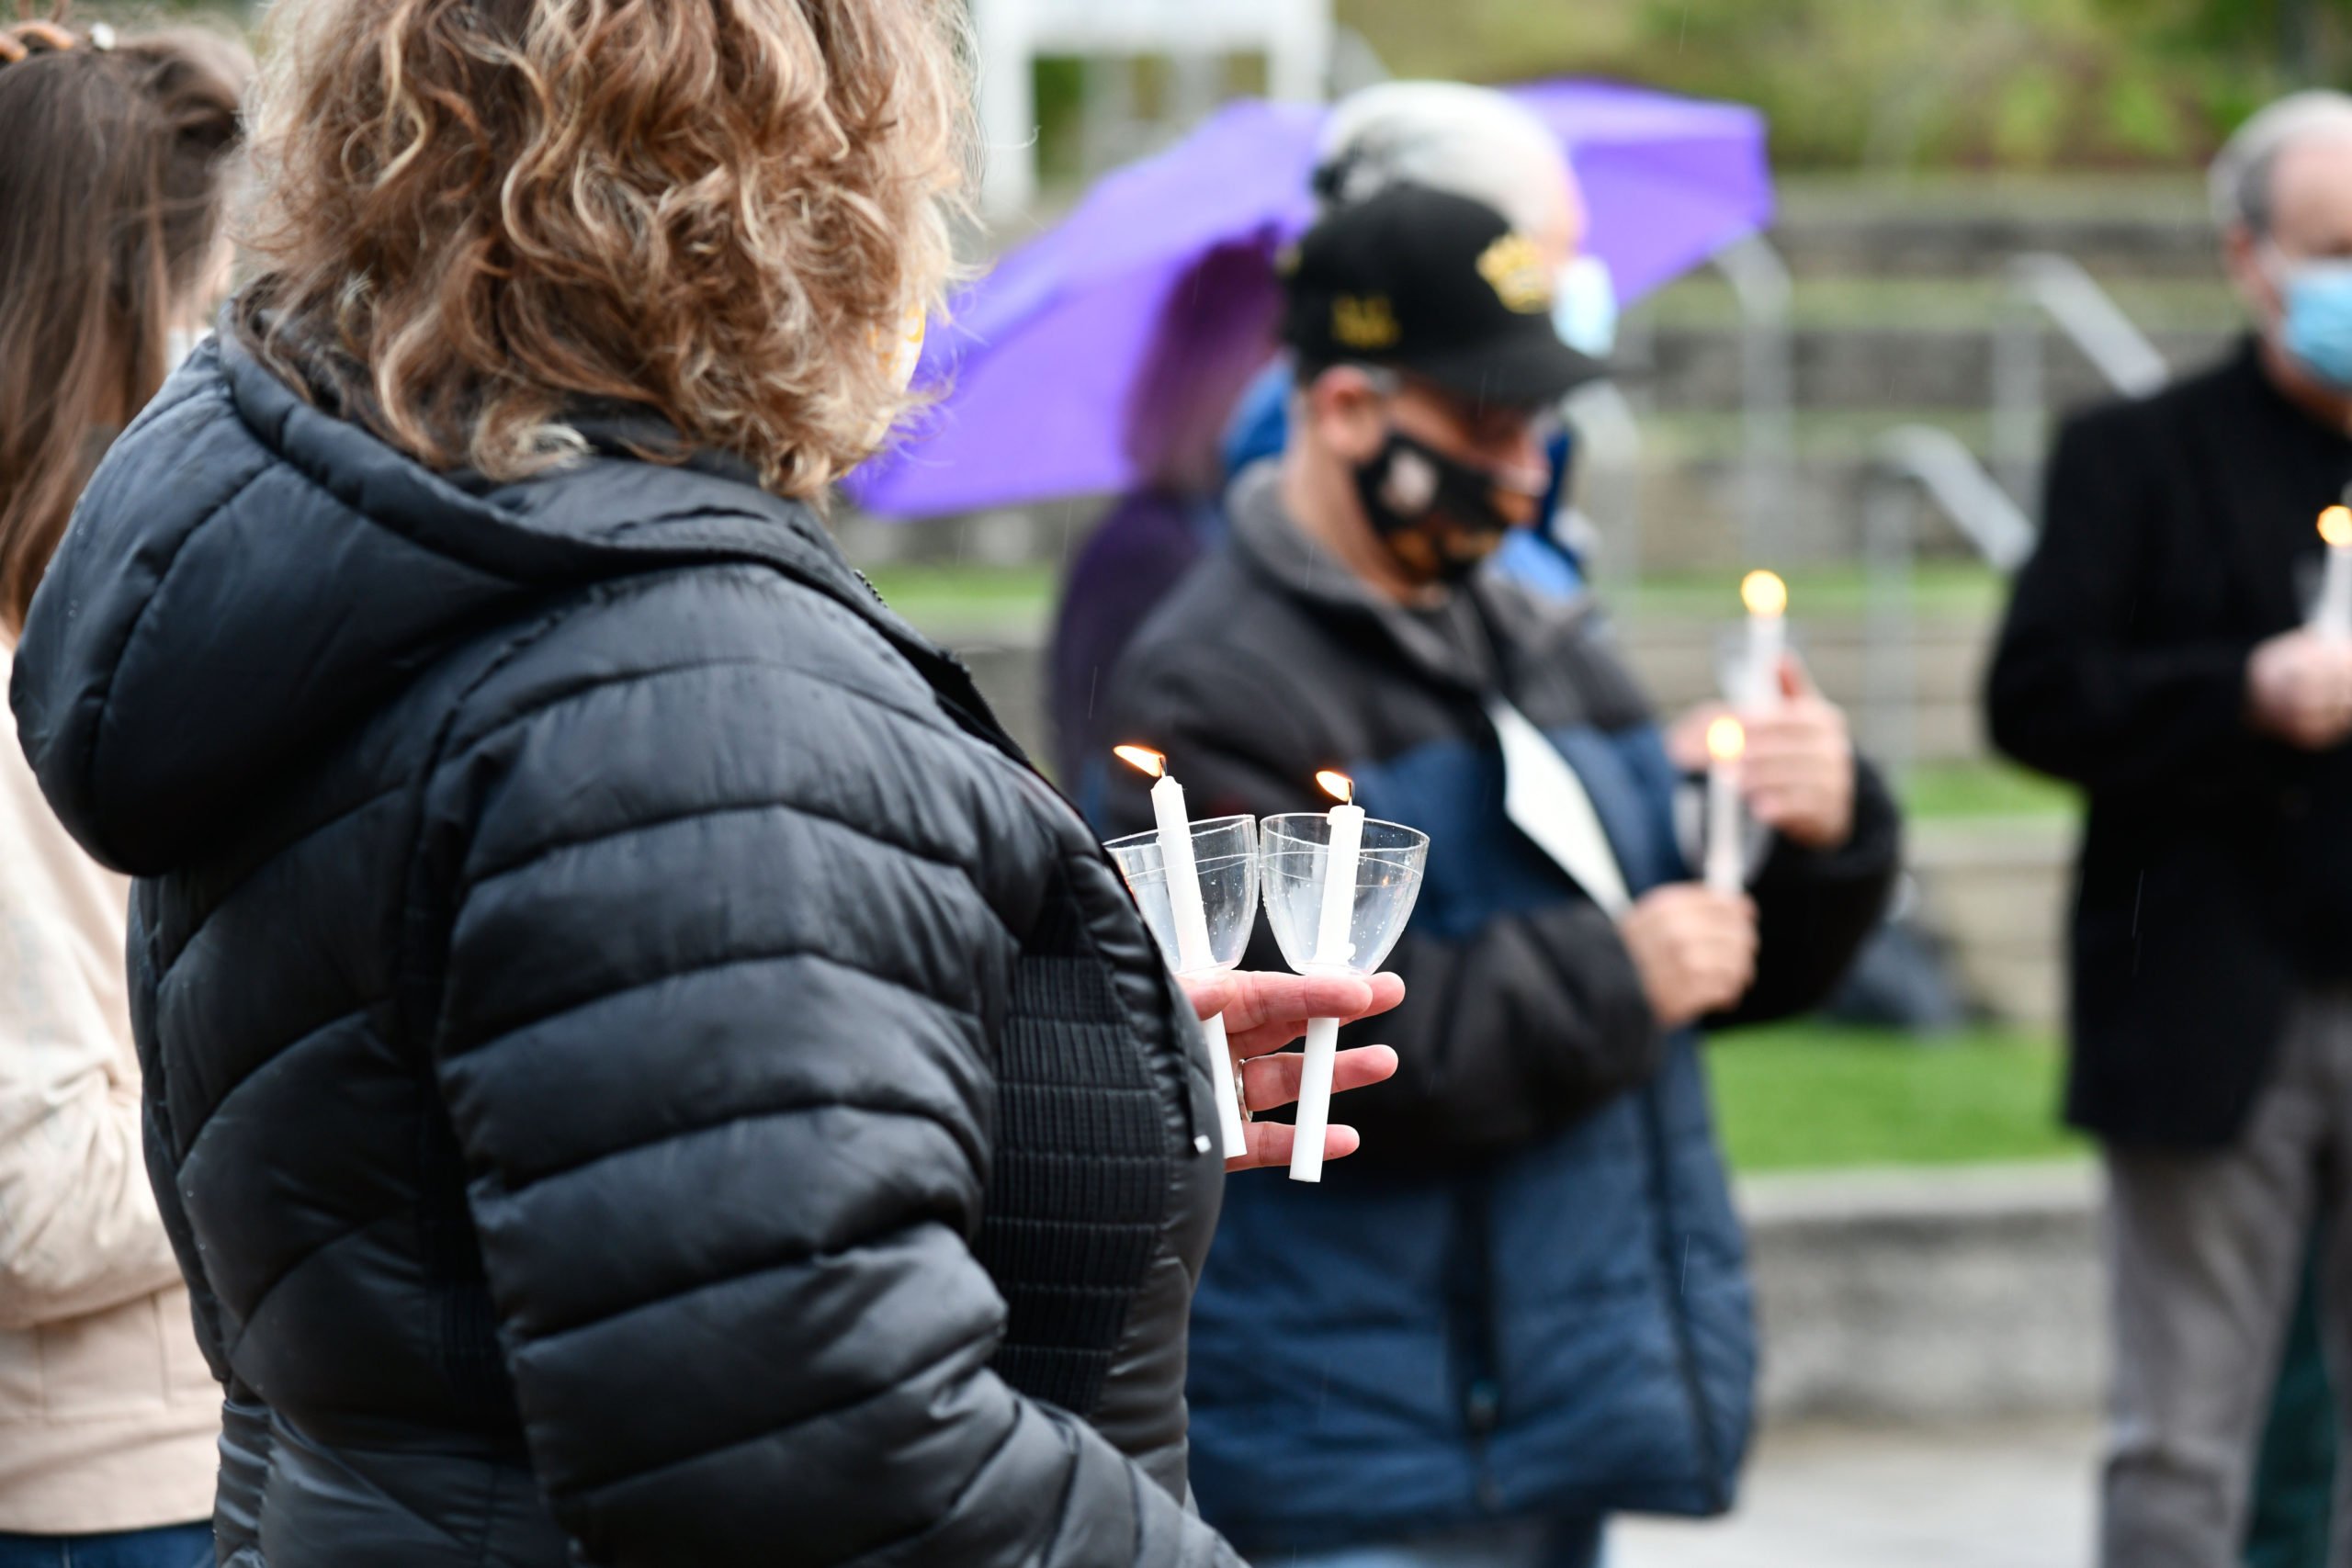 A Candle Light Vigil for those lost to addiction was held on Saturday evening in Good Ground Park in Hampton Bays. The event was sponsored the Southampton Town Addiction and Recovery Committee.  DANA SHAW